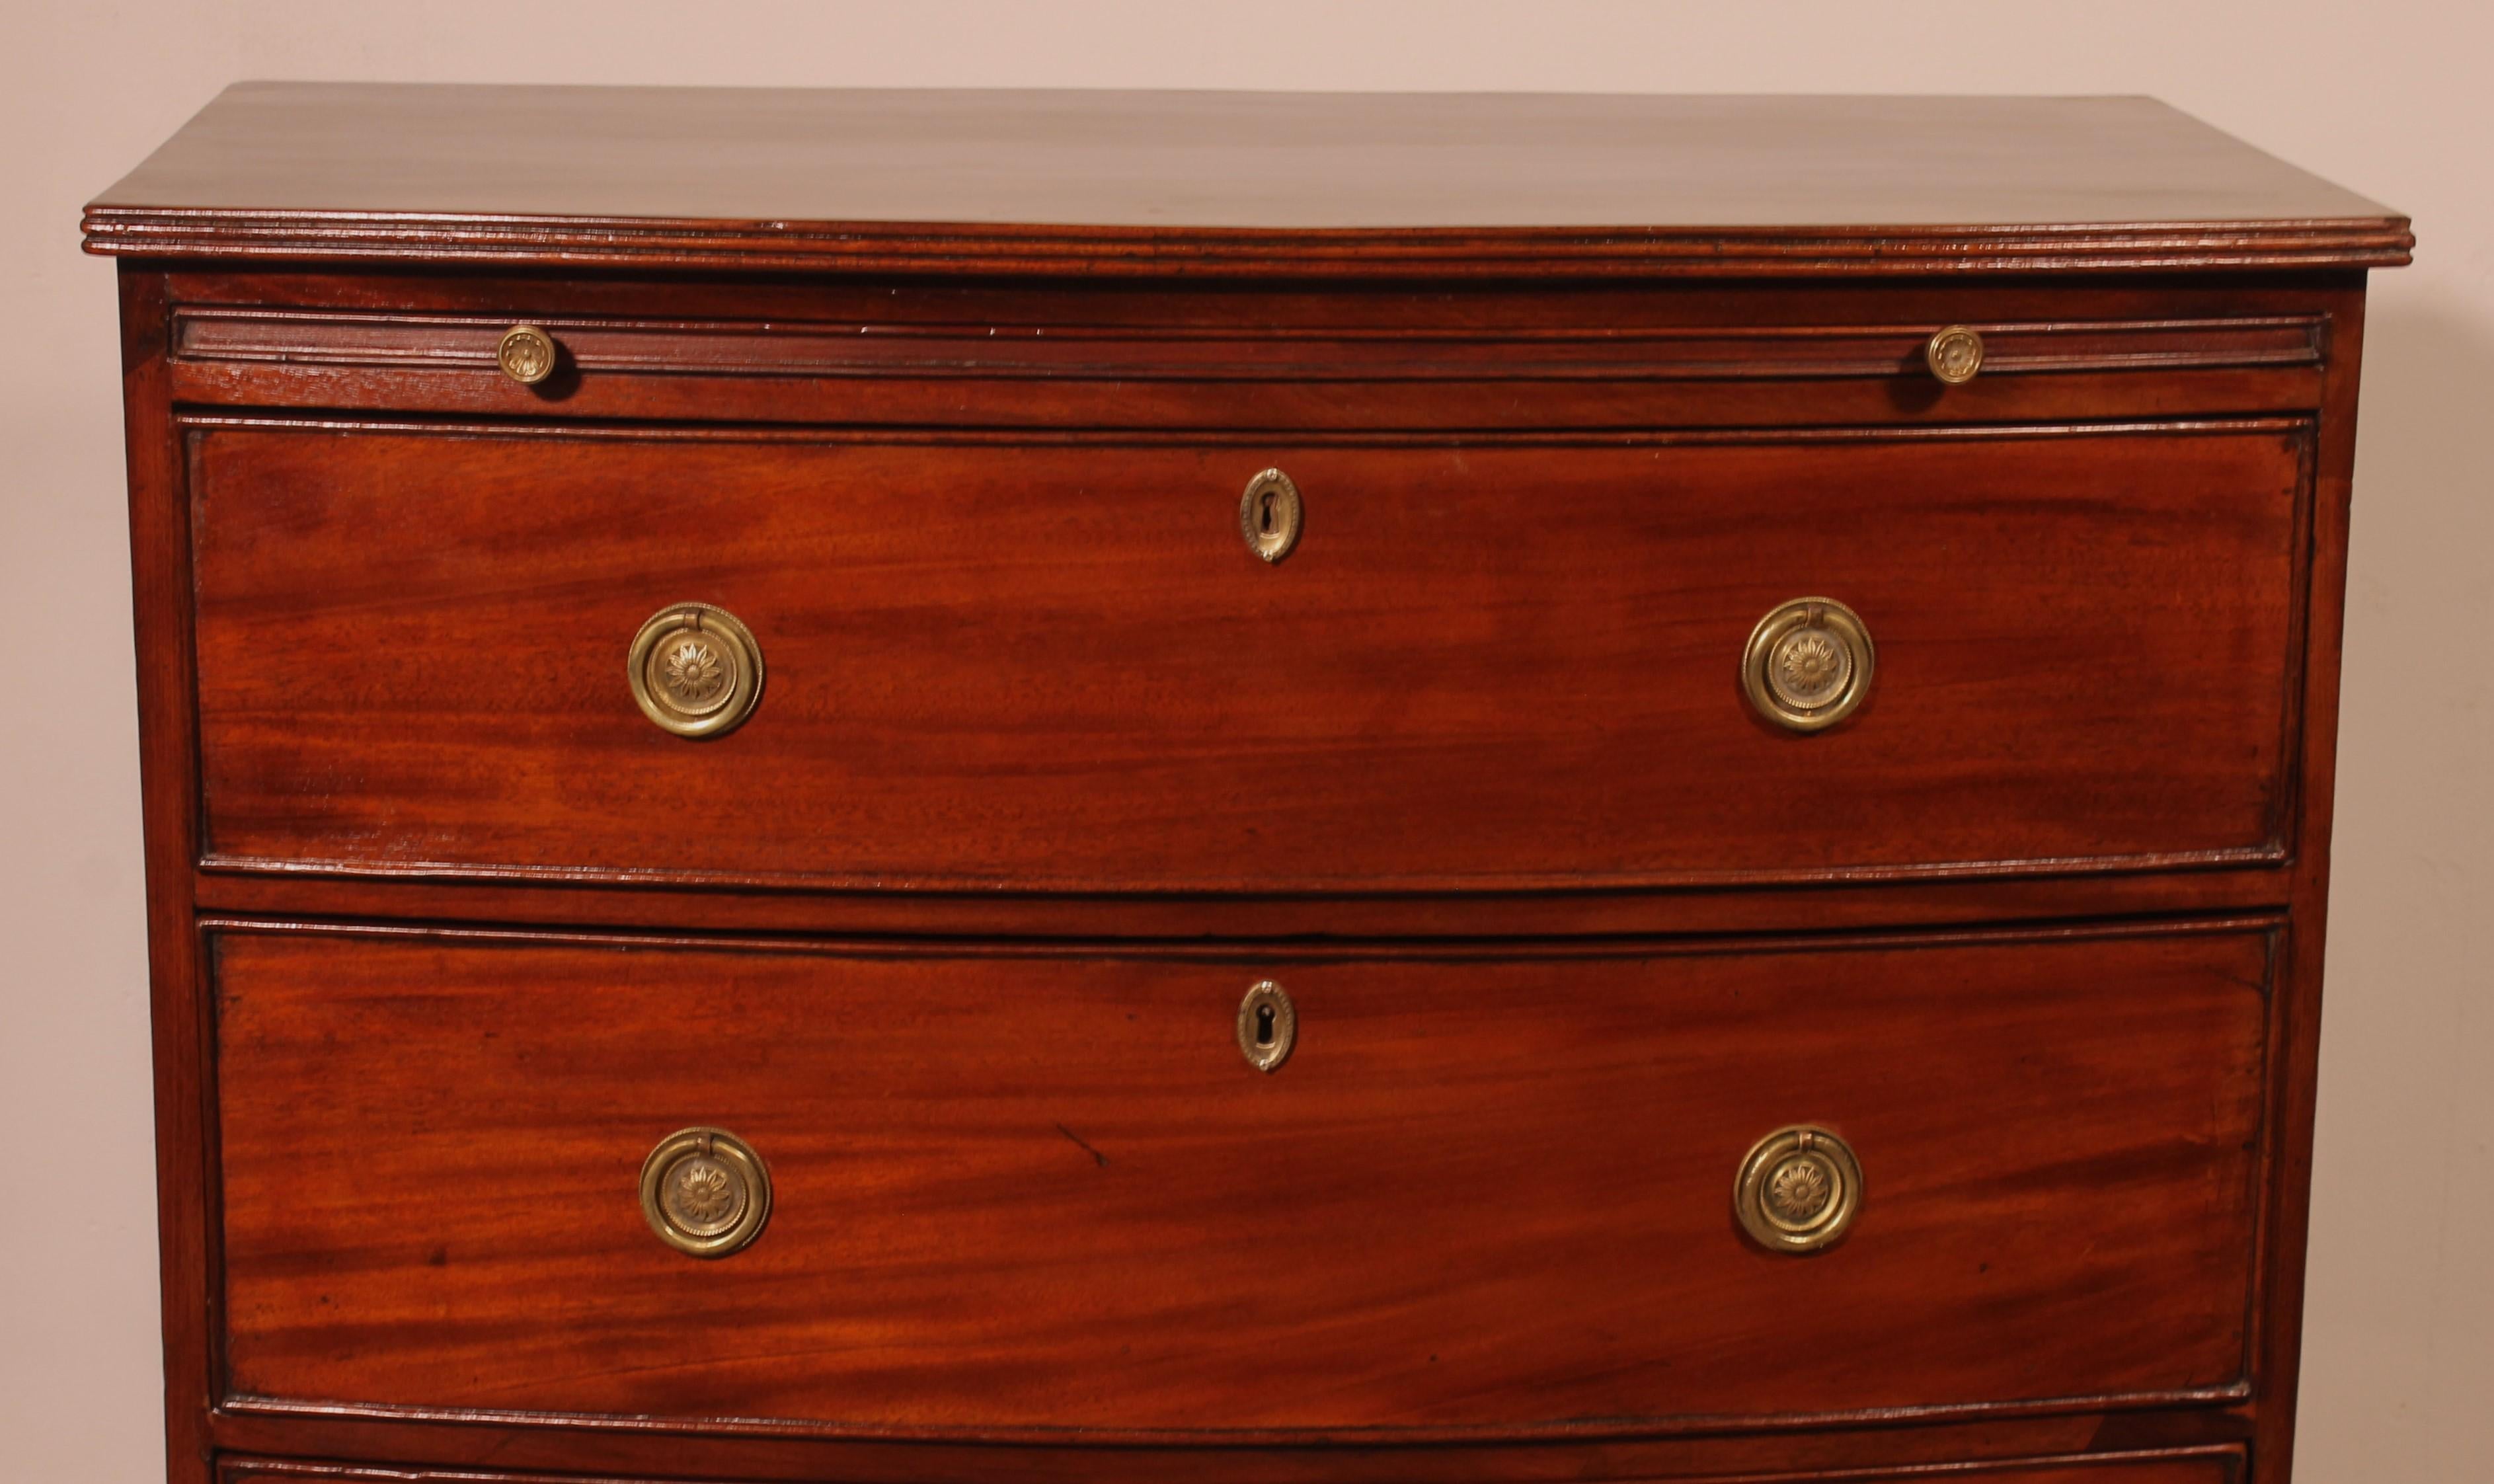 a fine bowfront mahogany chest of drawers circa 1800
English chest with a writing table below the top
The writing table is a sign that the chest of drawers is from the end of the 18th century - beginning of the 19th century since this was no longer